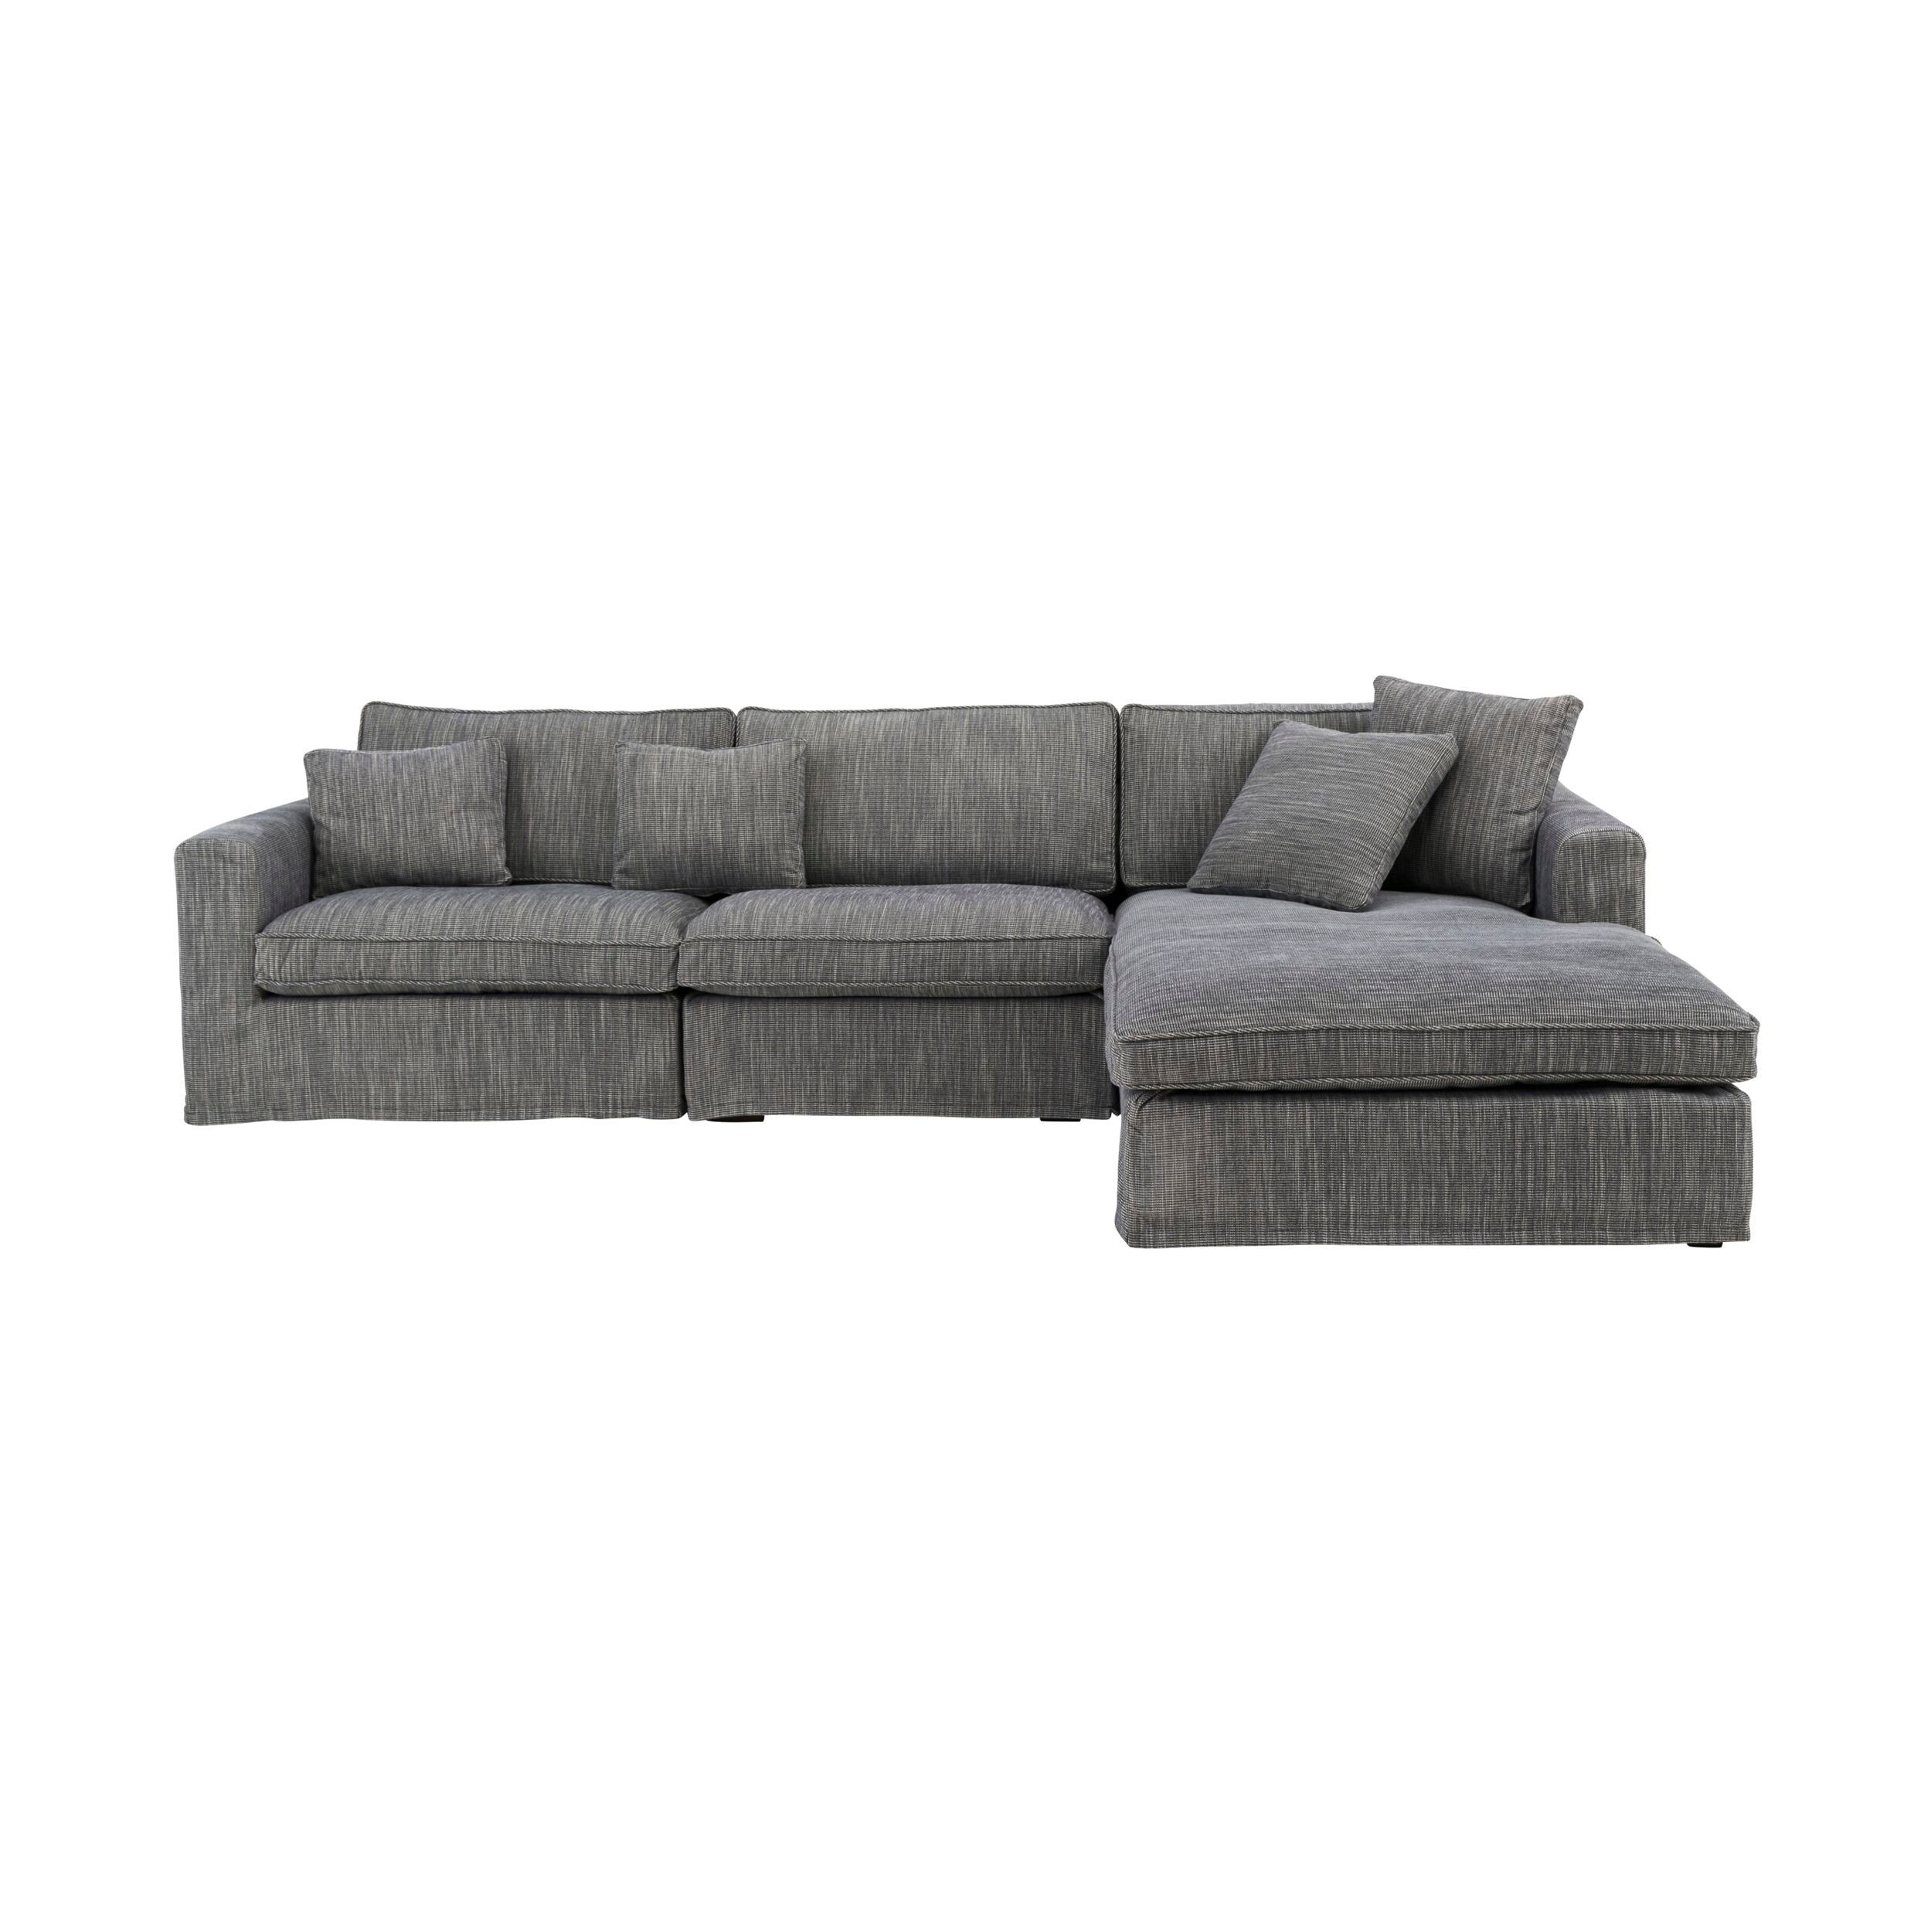 Huxley 3 Seater Blend Sofa with Right Chaise Charcoal Grey Weave C-001